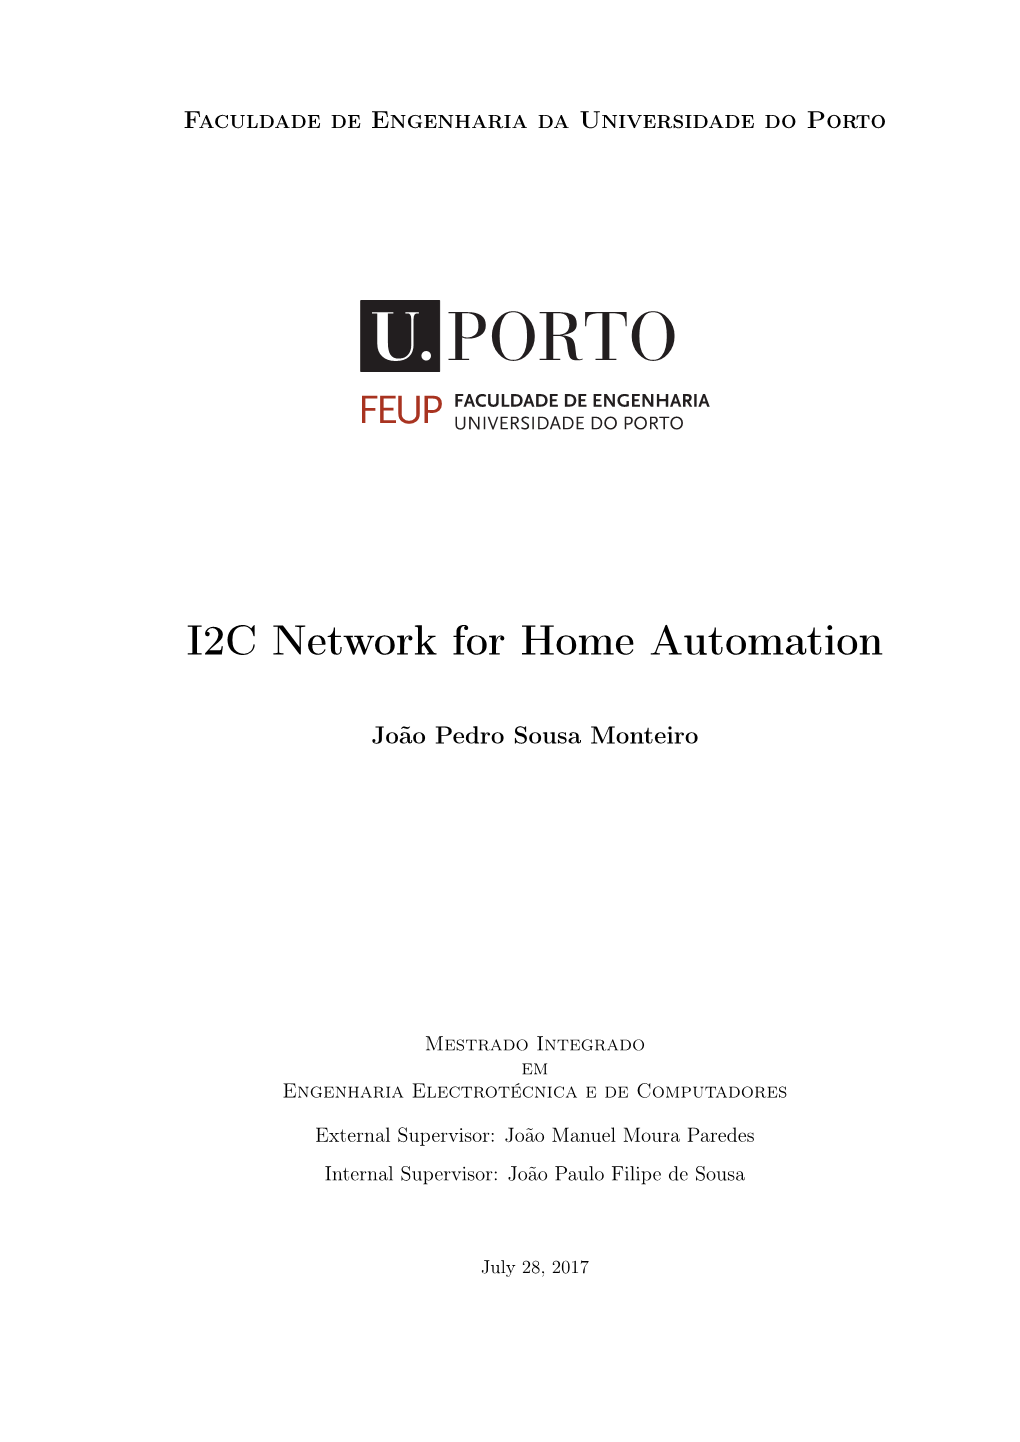 I2C Network for Home Automation